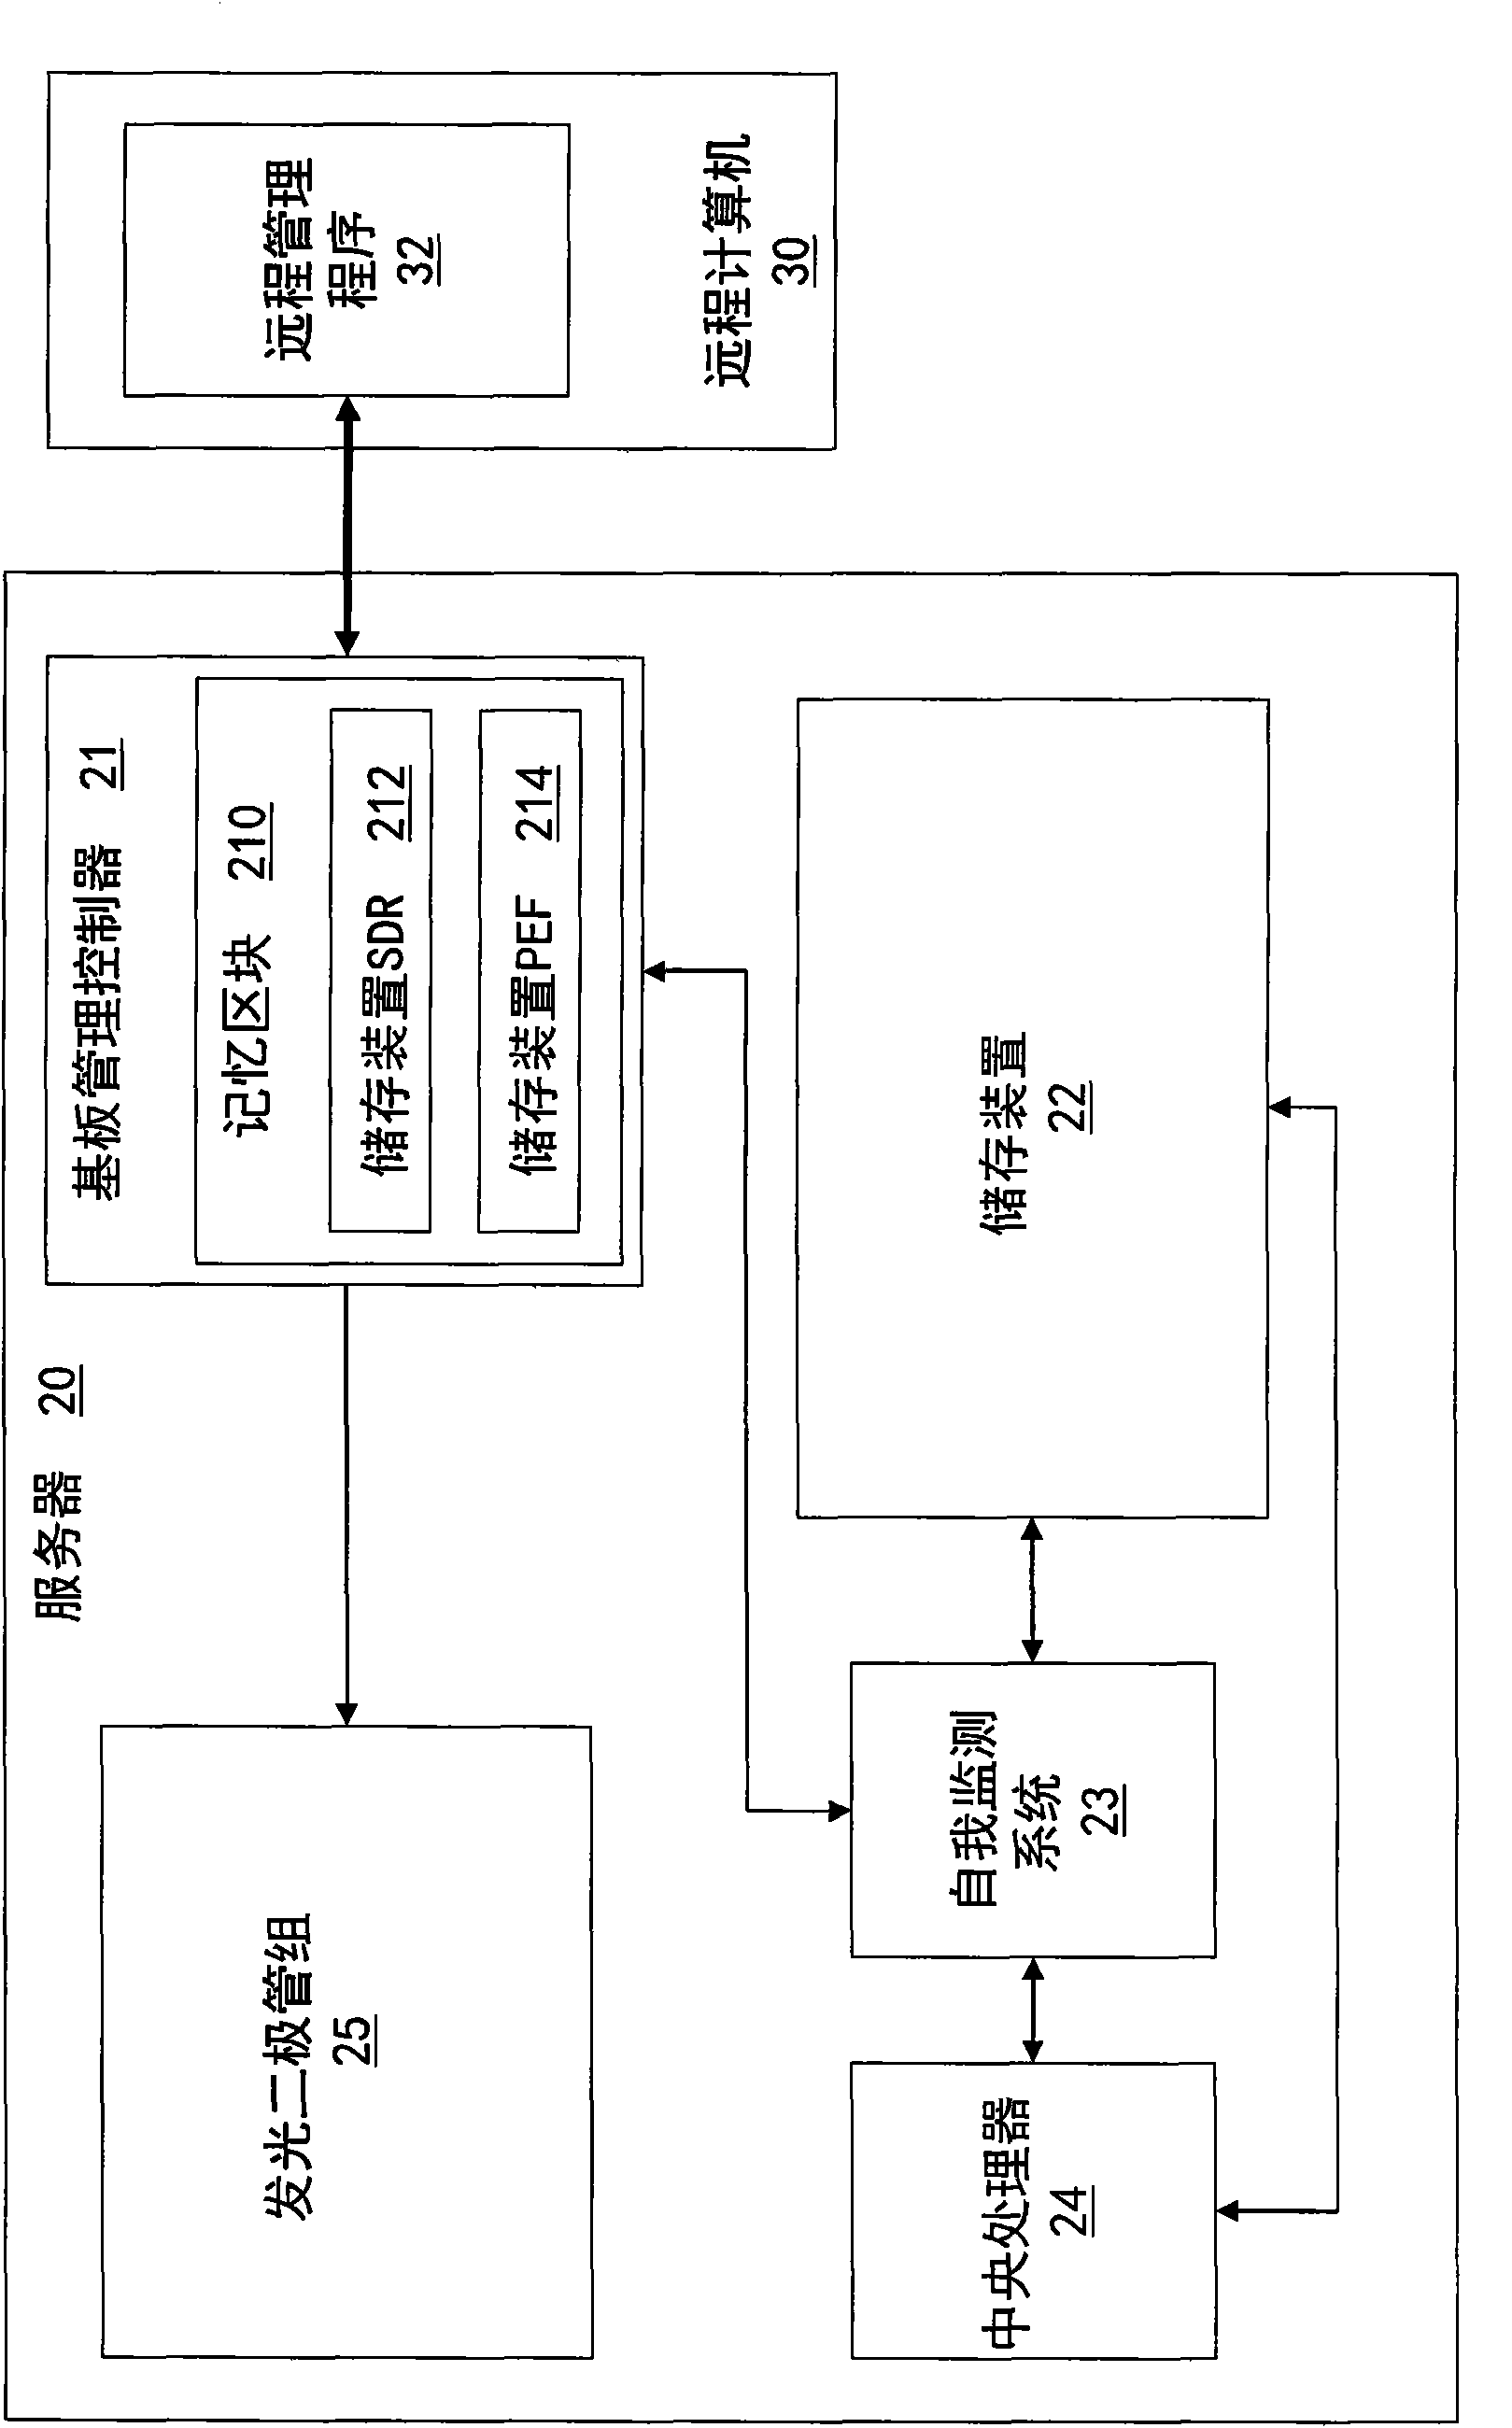 Method for obtaining fault signal of storage device by baseboard management controller